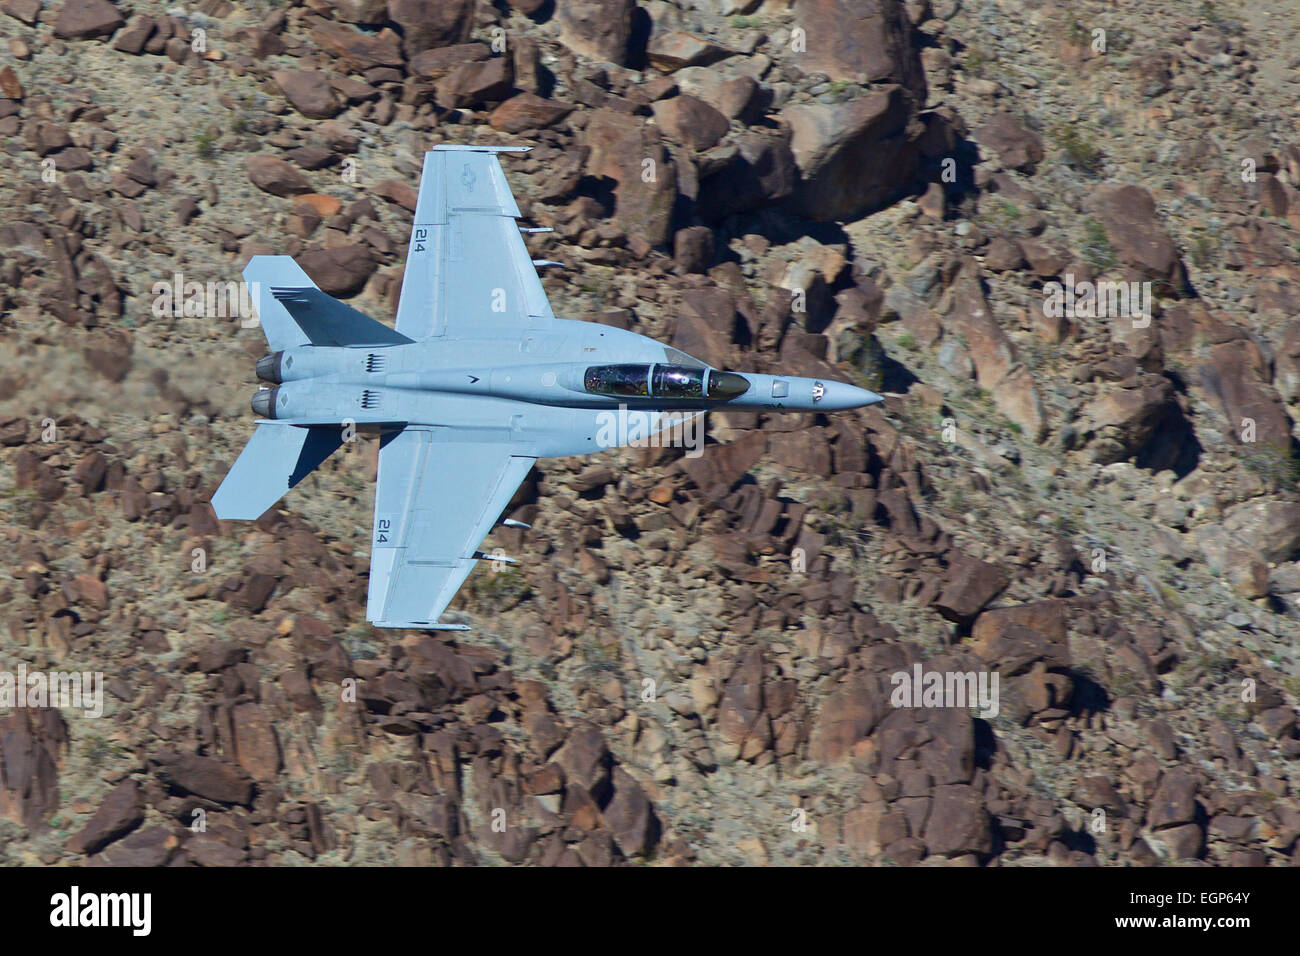 Close Up Topside View Of A US Navy F/A-18F Super Hornet Jet Fighter, VX-9 Squadron, China Lake, Flying At Low Level. Stock Photo